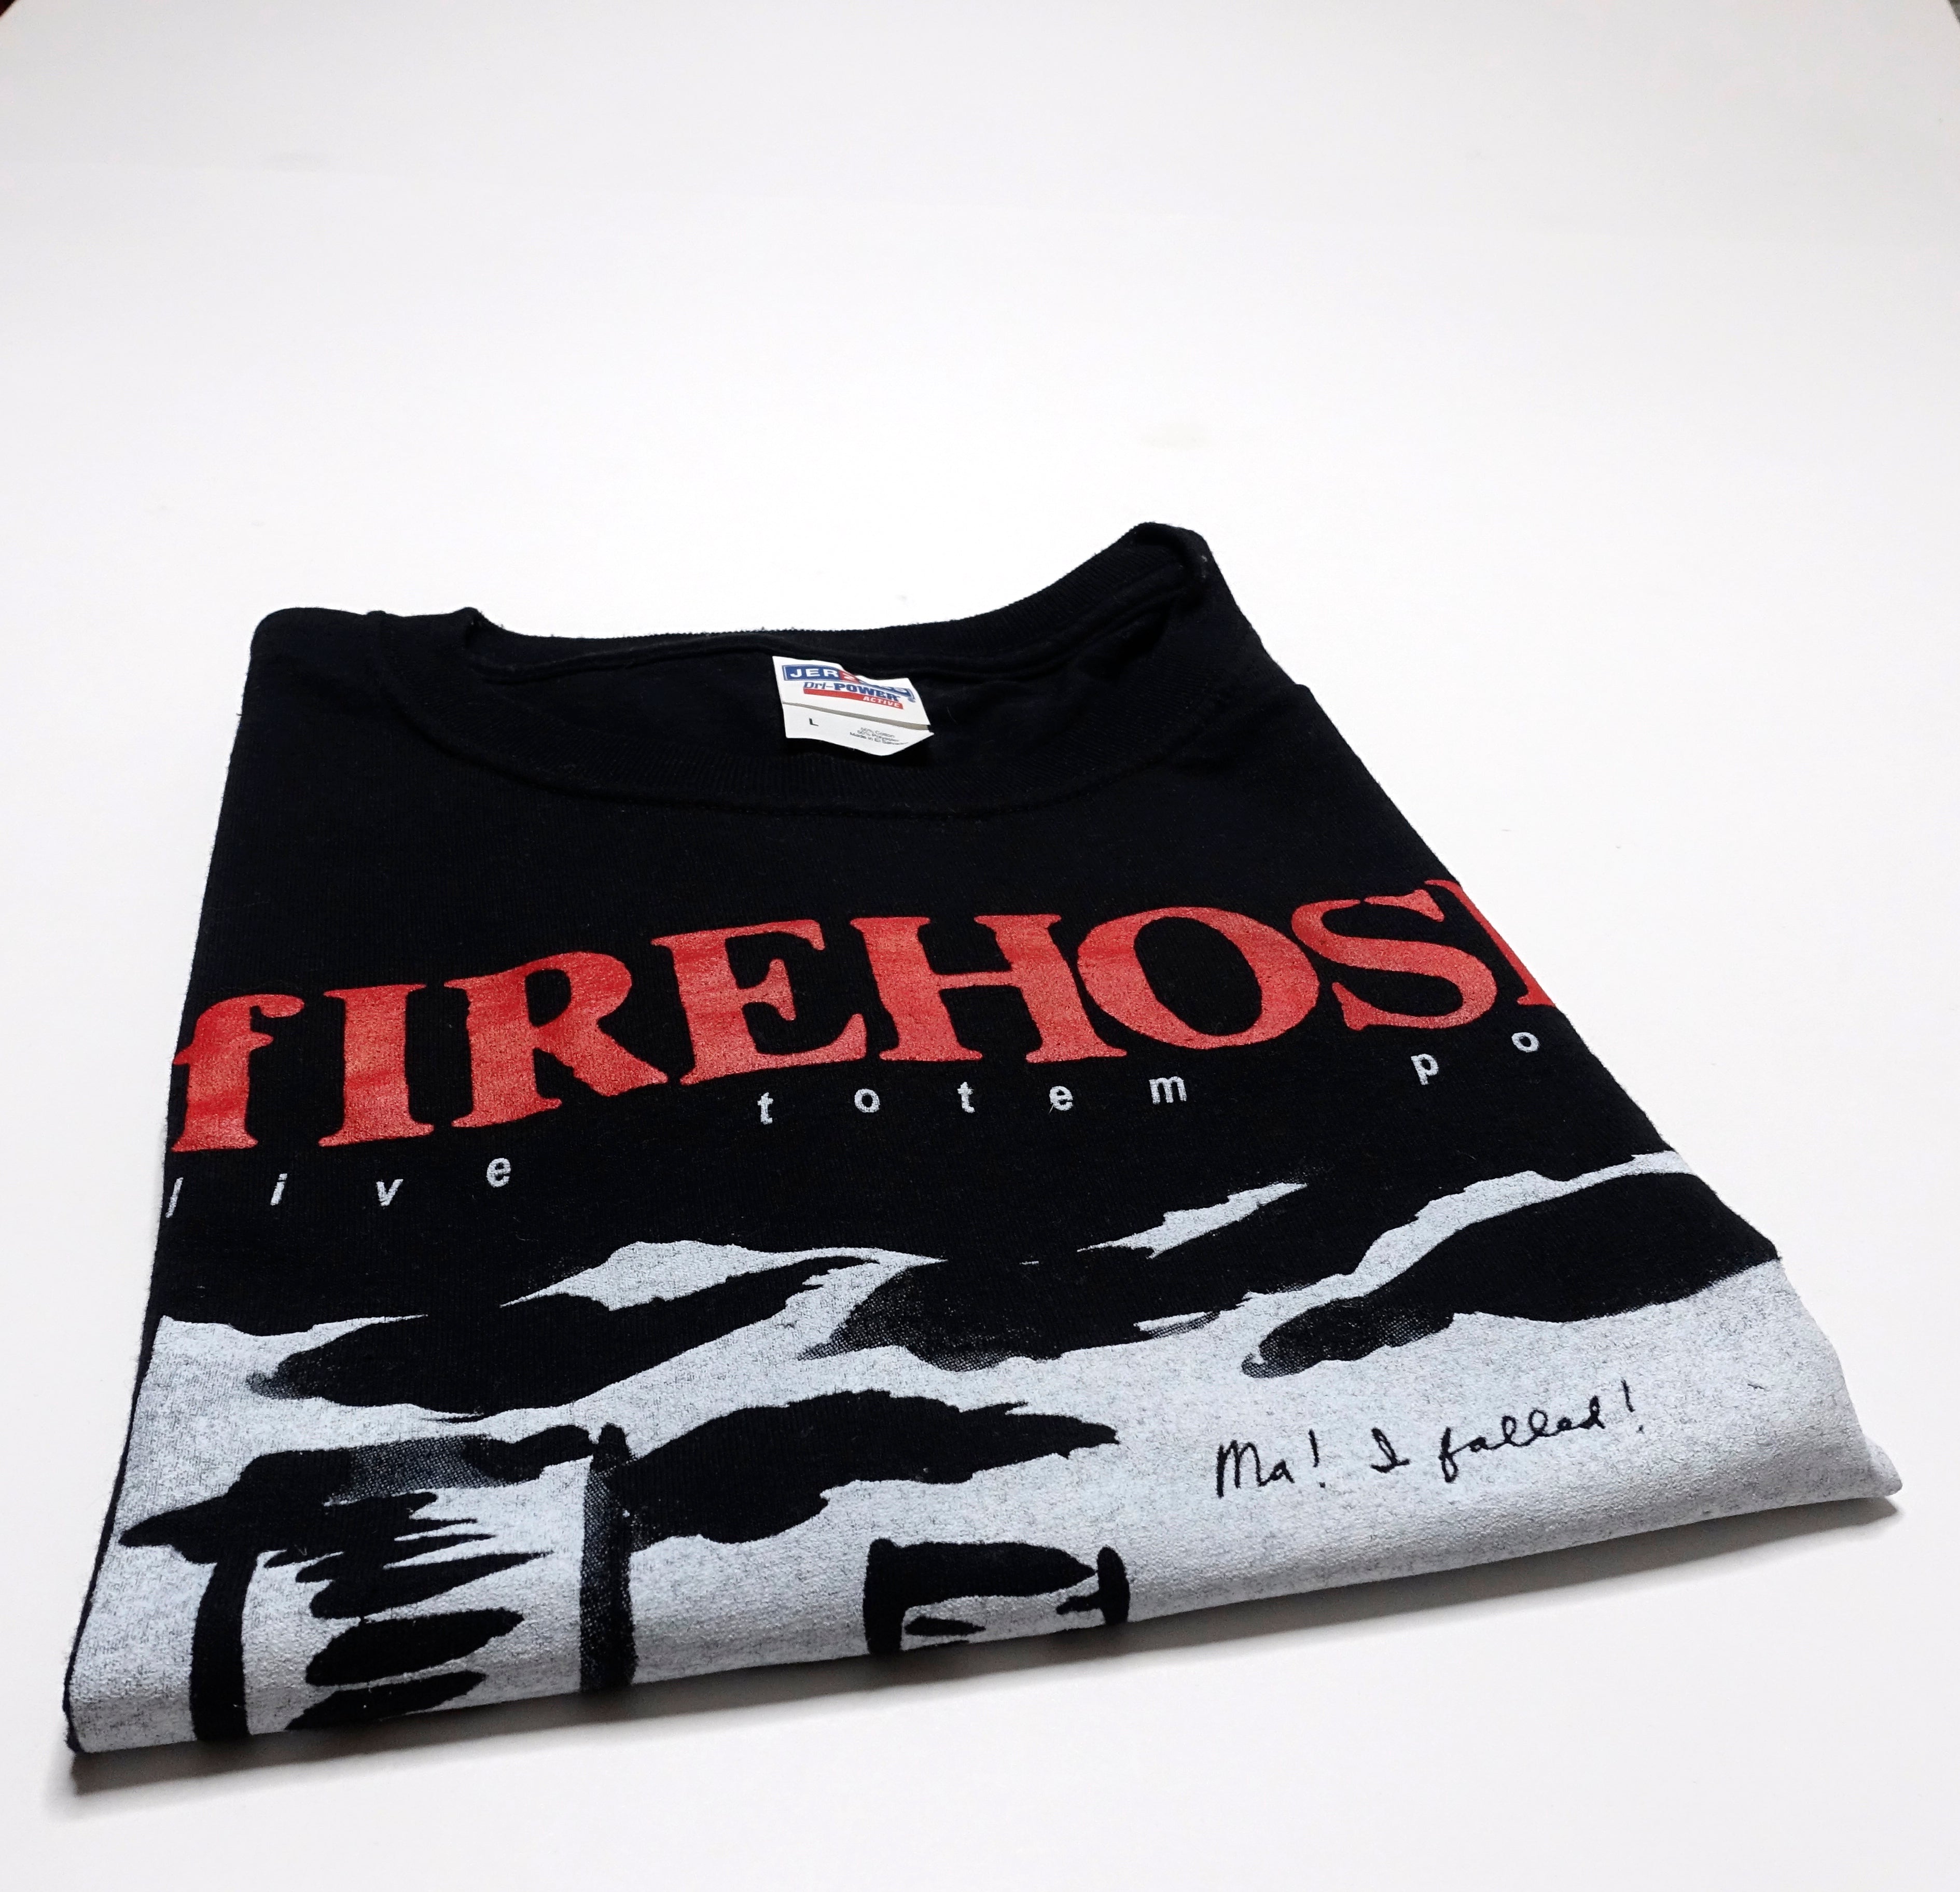 fIREHOSE - Live Totem Pole EP Tour Shirt Size Large (Bootleg By Me)